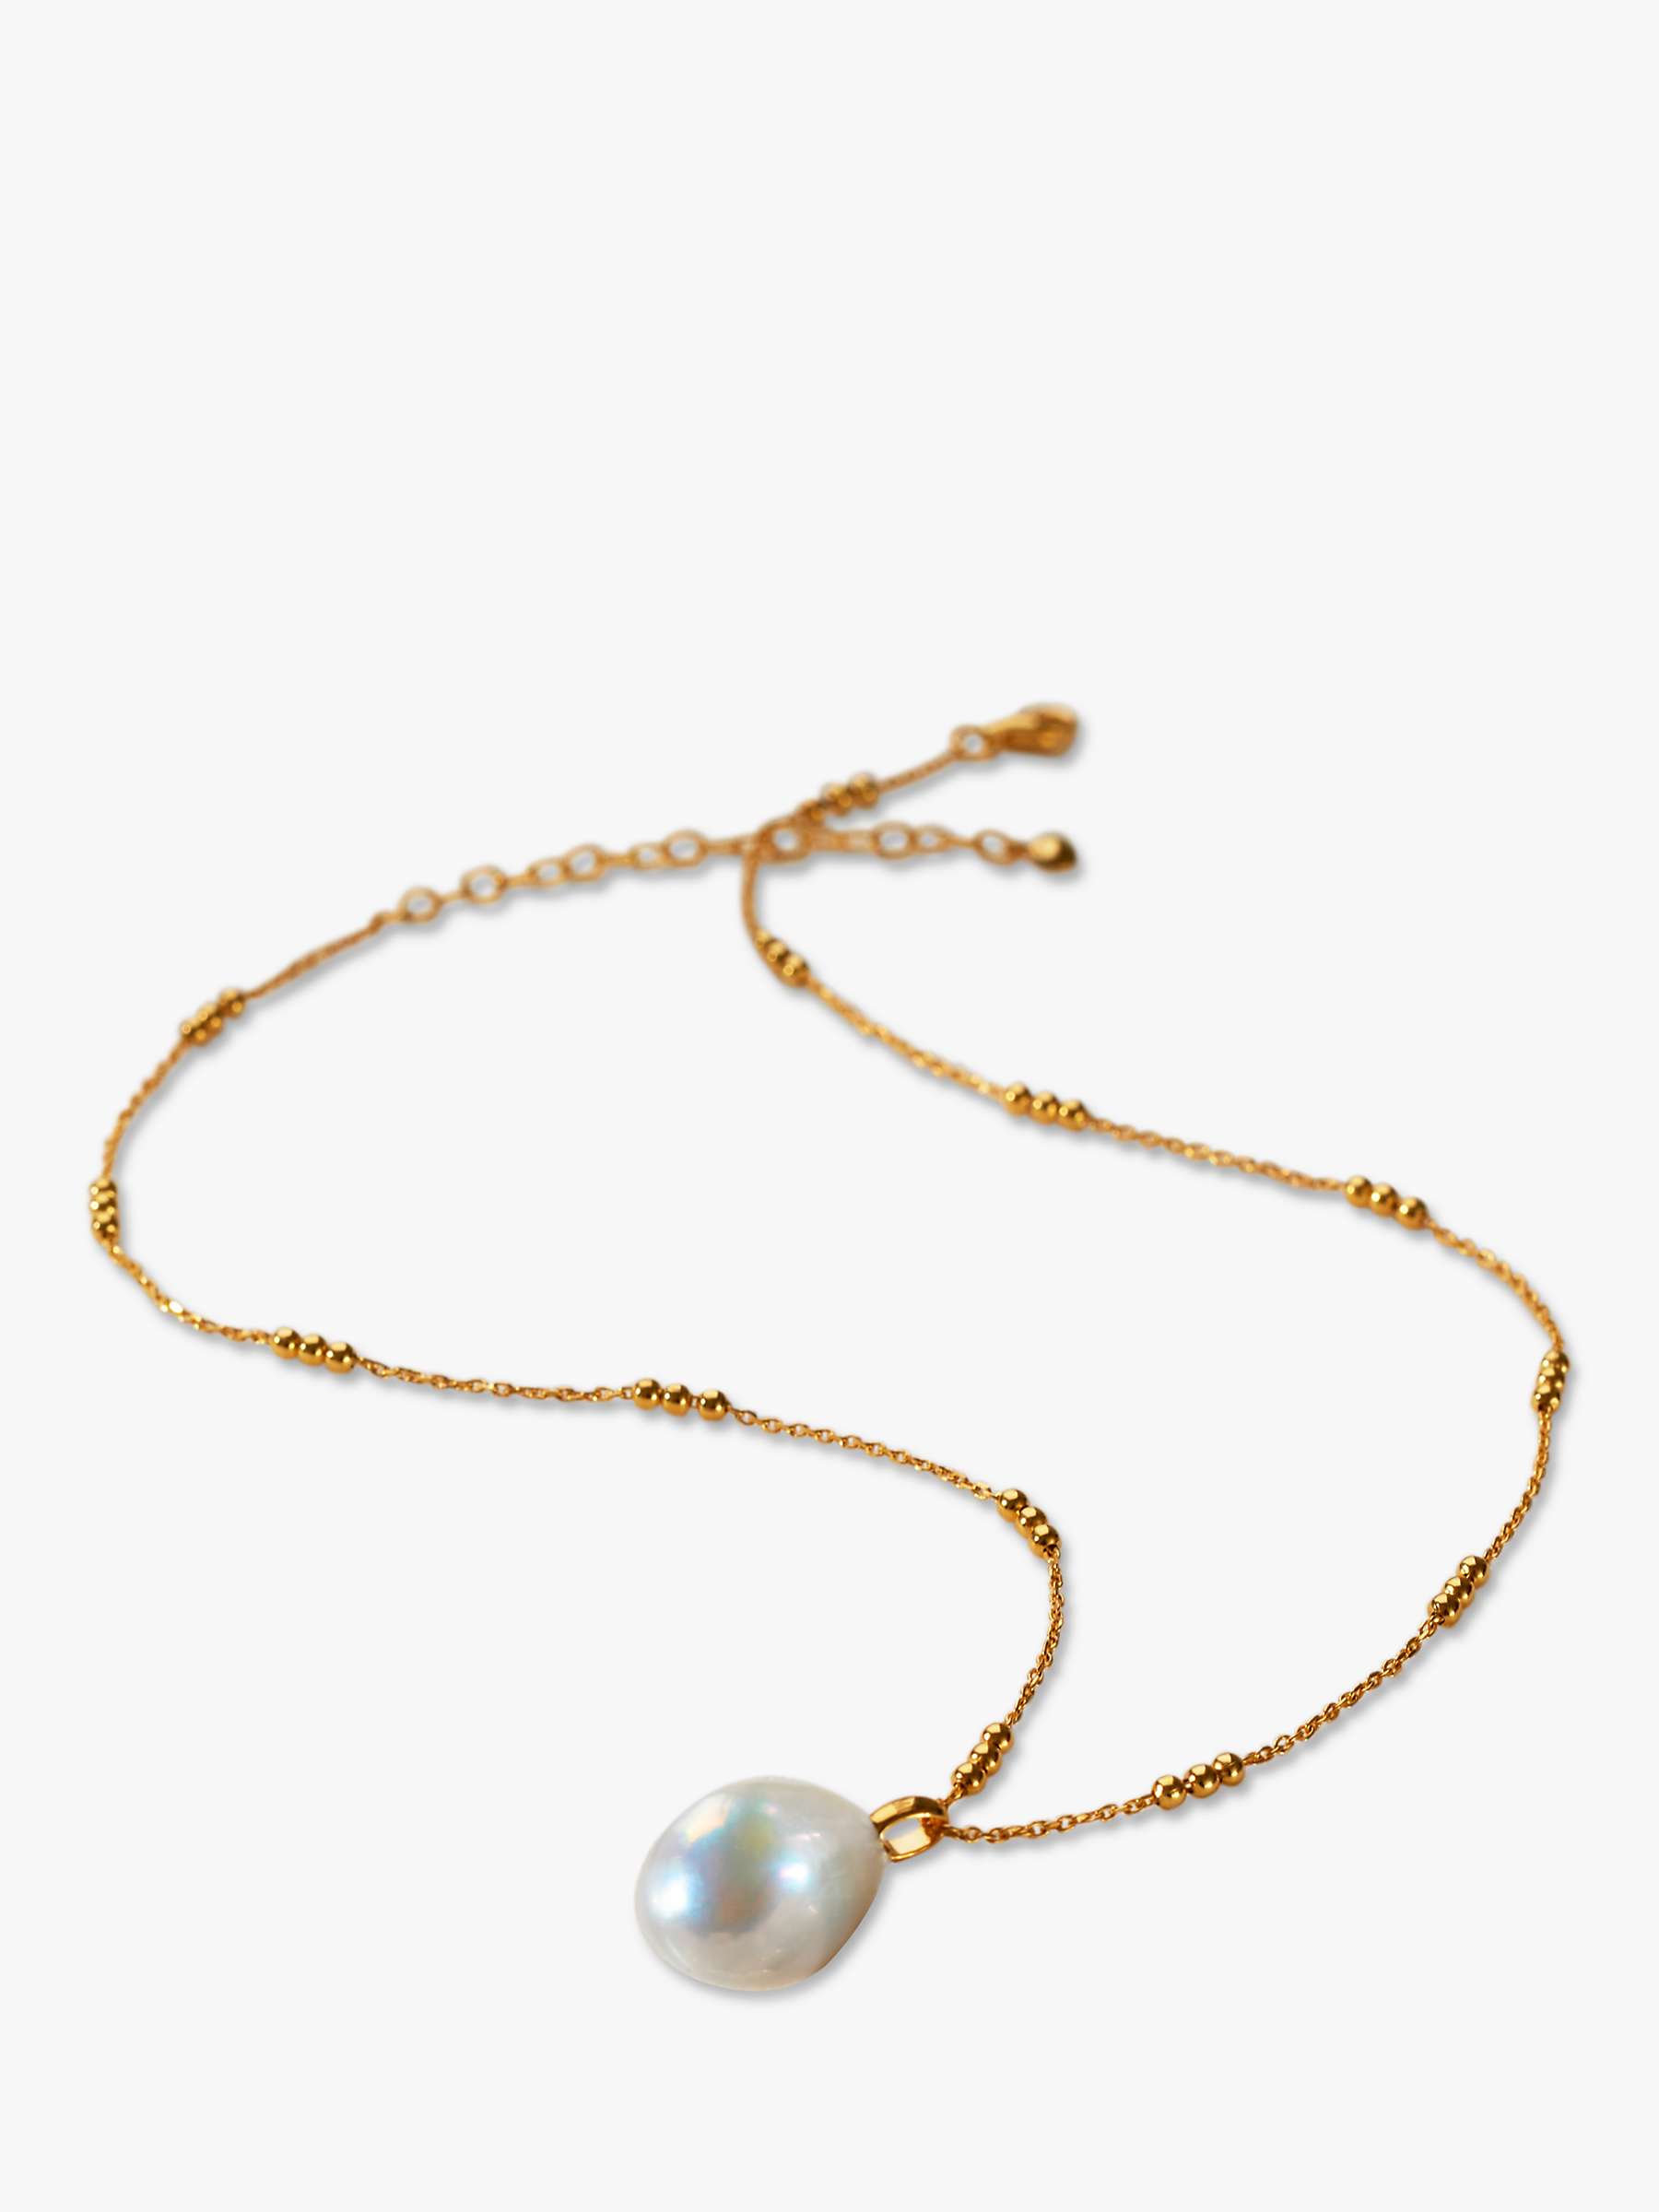 Buy Monica Vinader Triple Beaded Chain Necklace Online at johnlewis.com